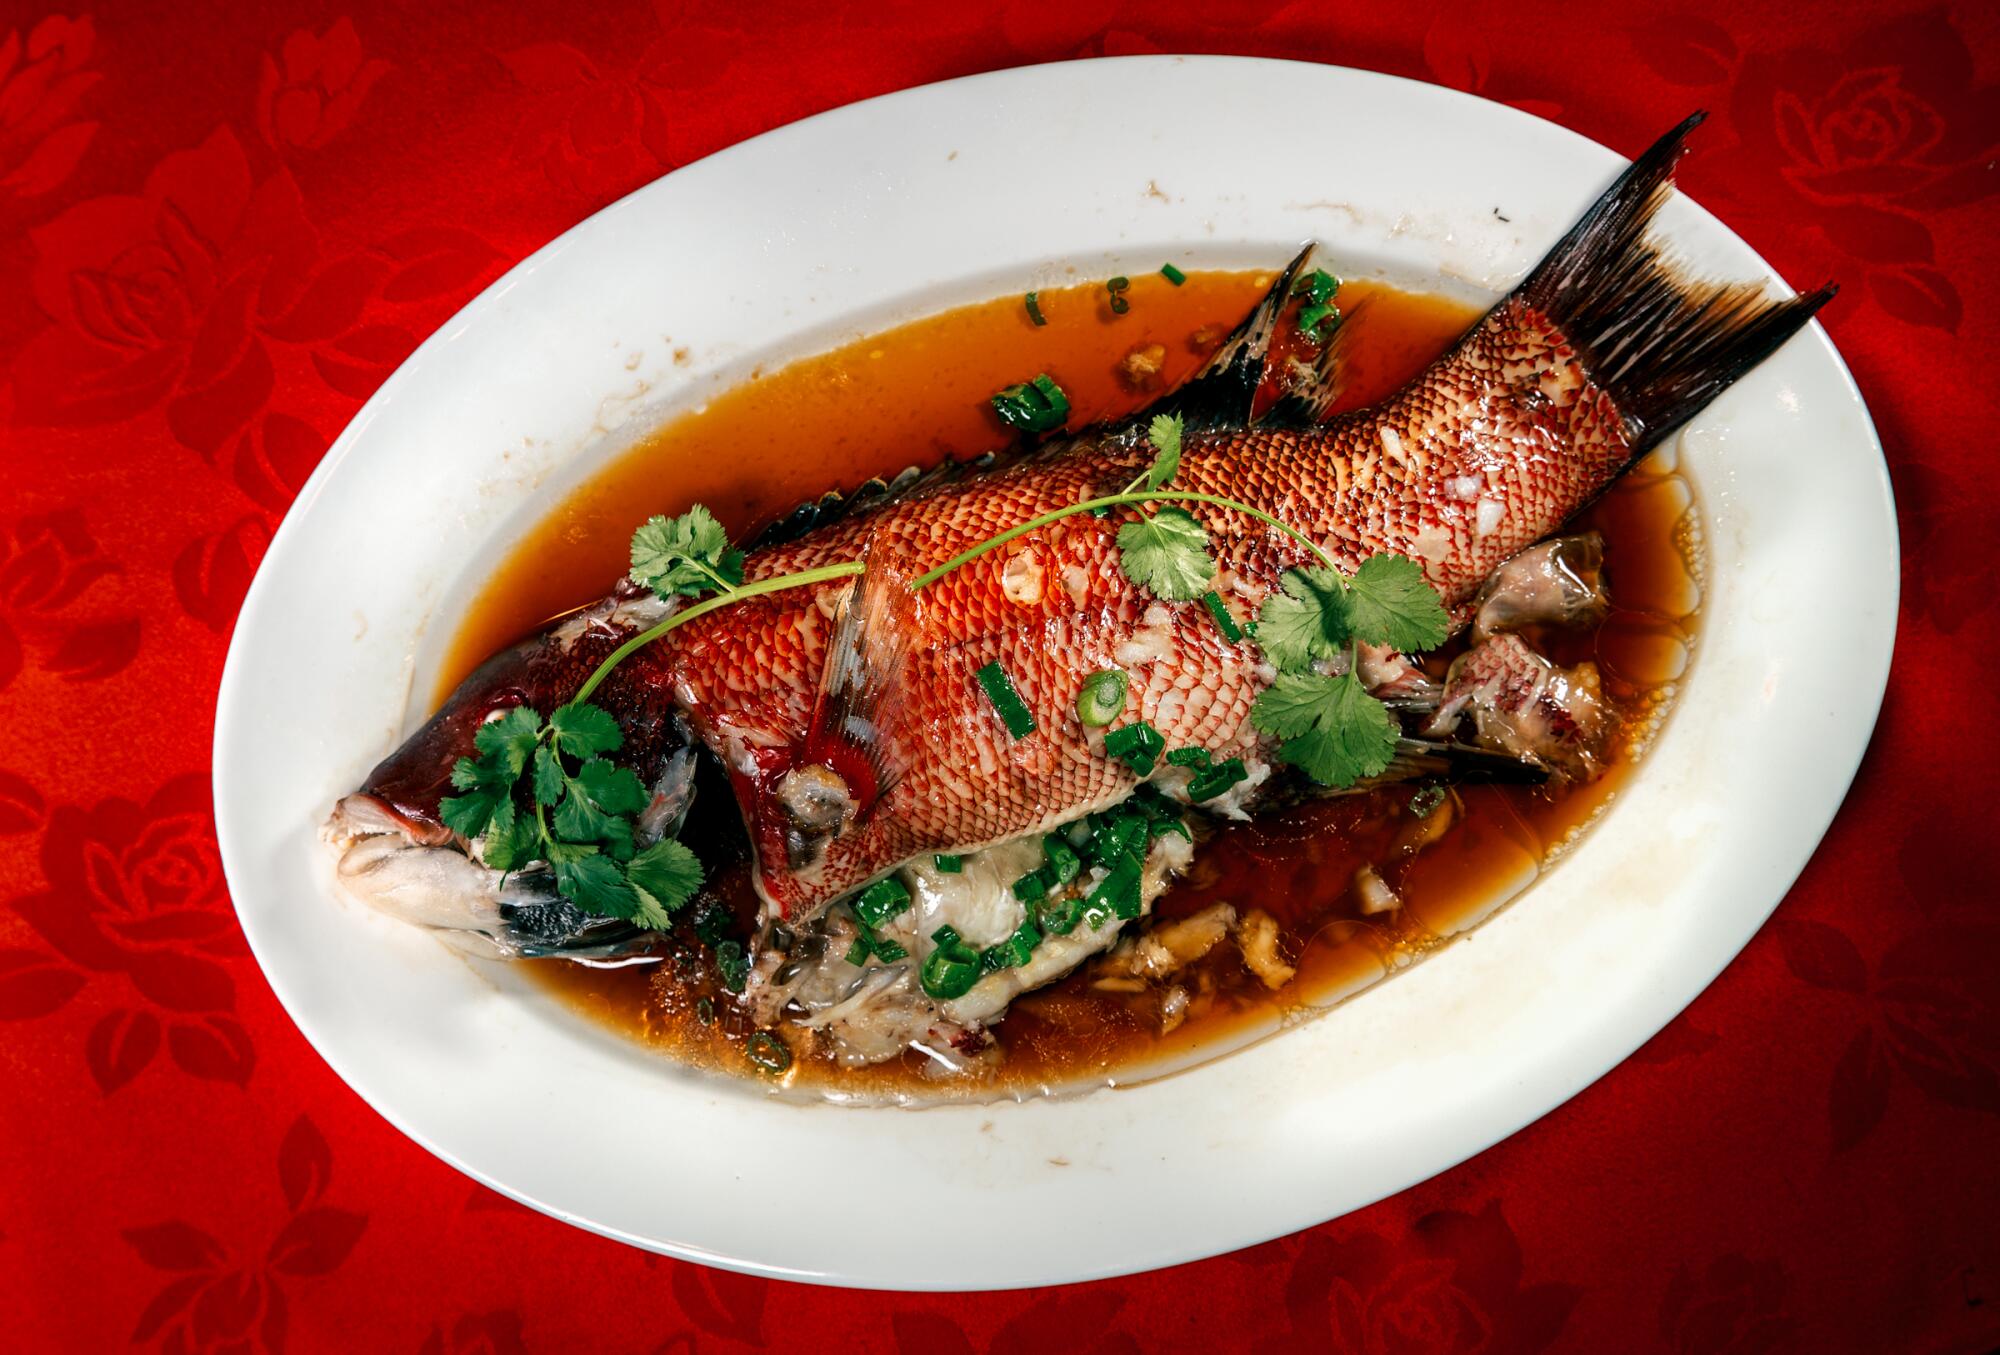 Whole steamed fish with ginger and scallions from Taste of MP restaurant for Lunar New Year.